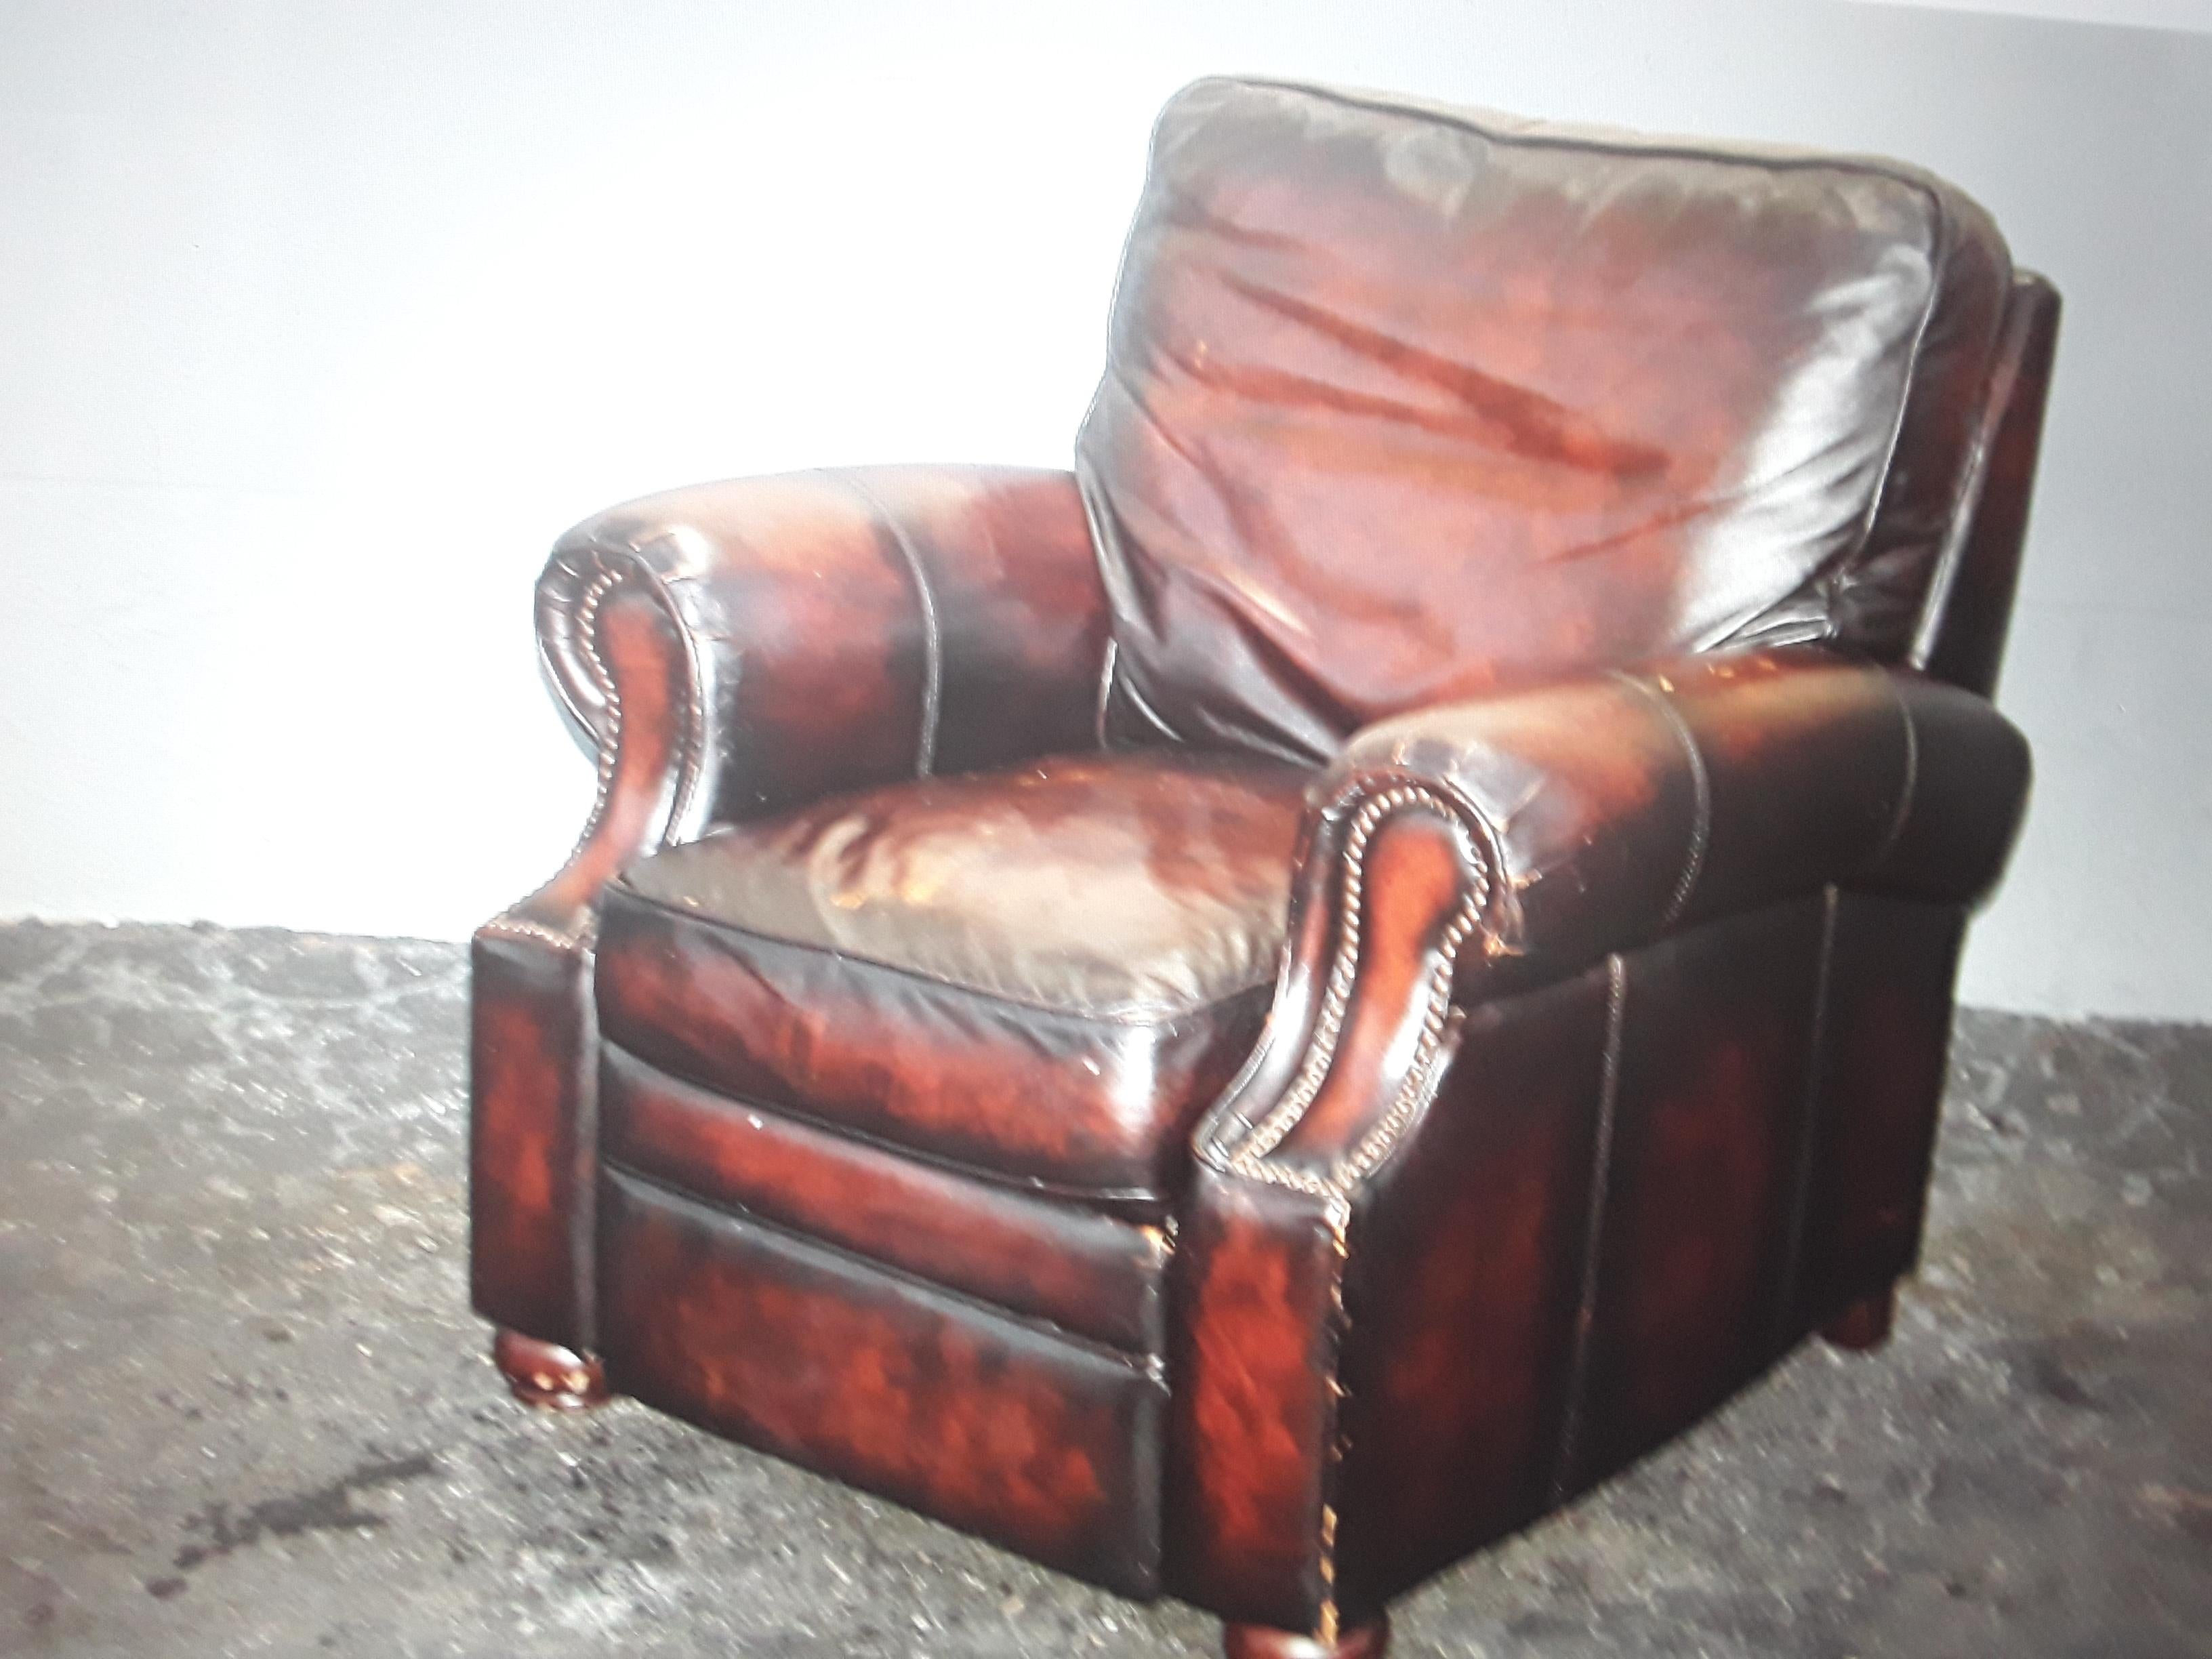 1940's Hollywood Regency Brown Lambskin Leather Recliner/ Lounge Chair by Bernhardt. Very comfortable and very beautiful.